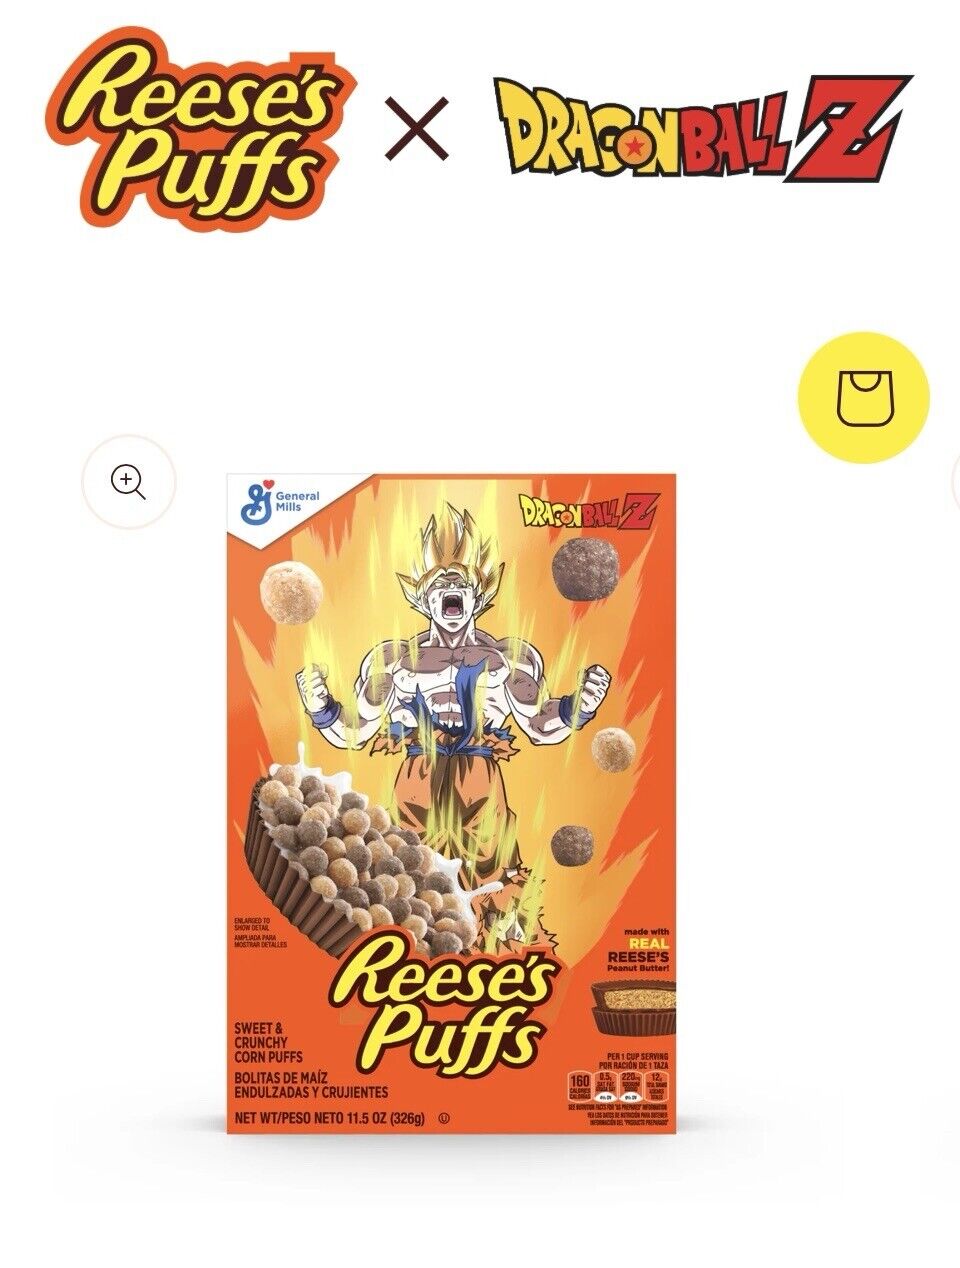 Reese’s Puffs X Dragon Ball Z Cereal Holographic Limited Edition - PRESALE